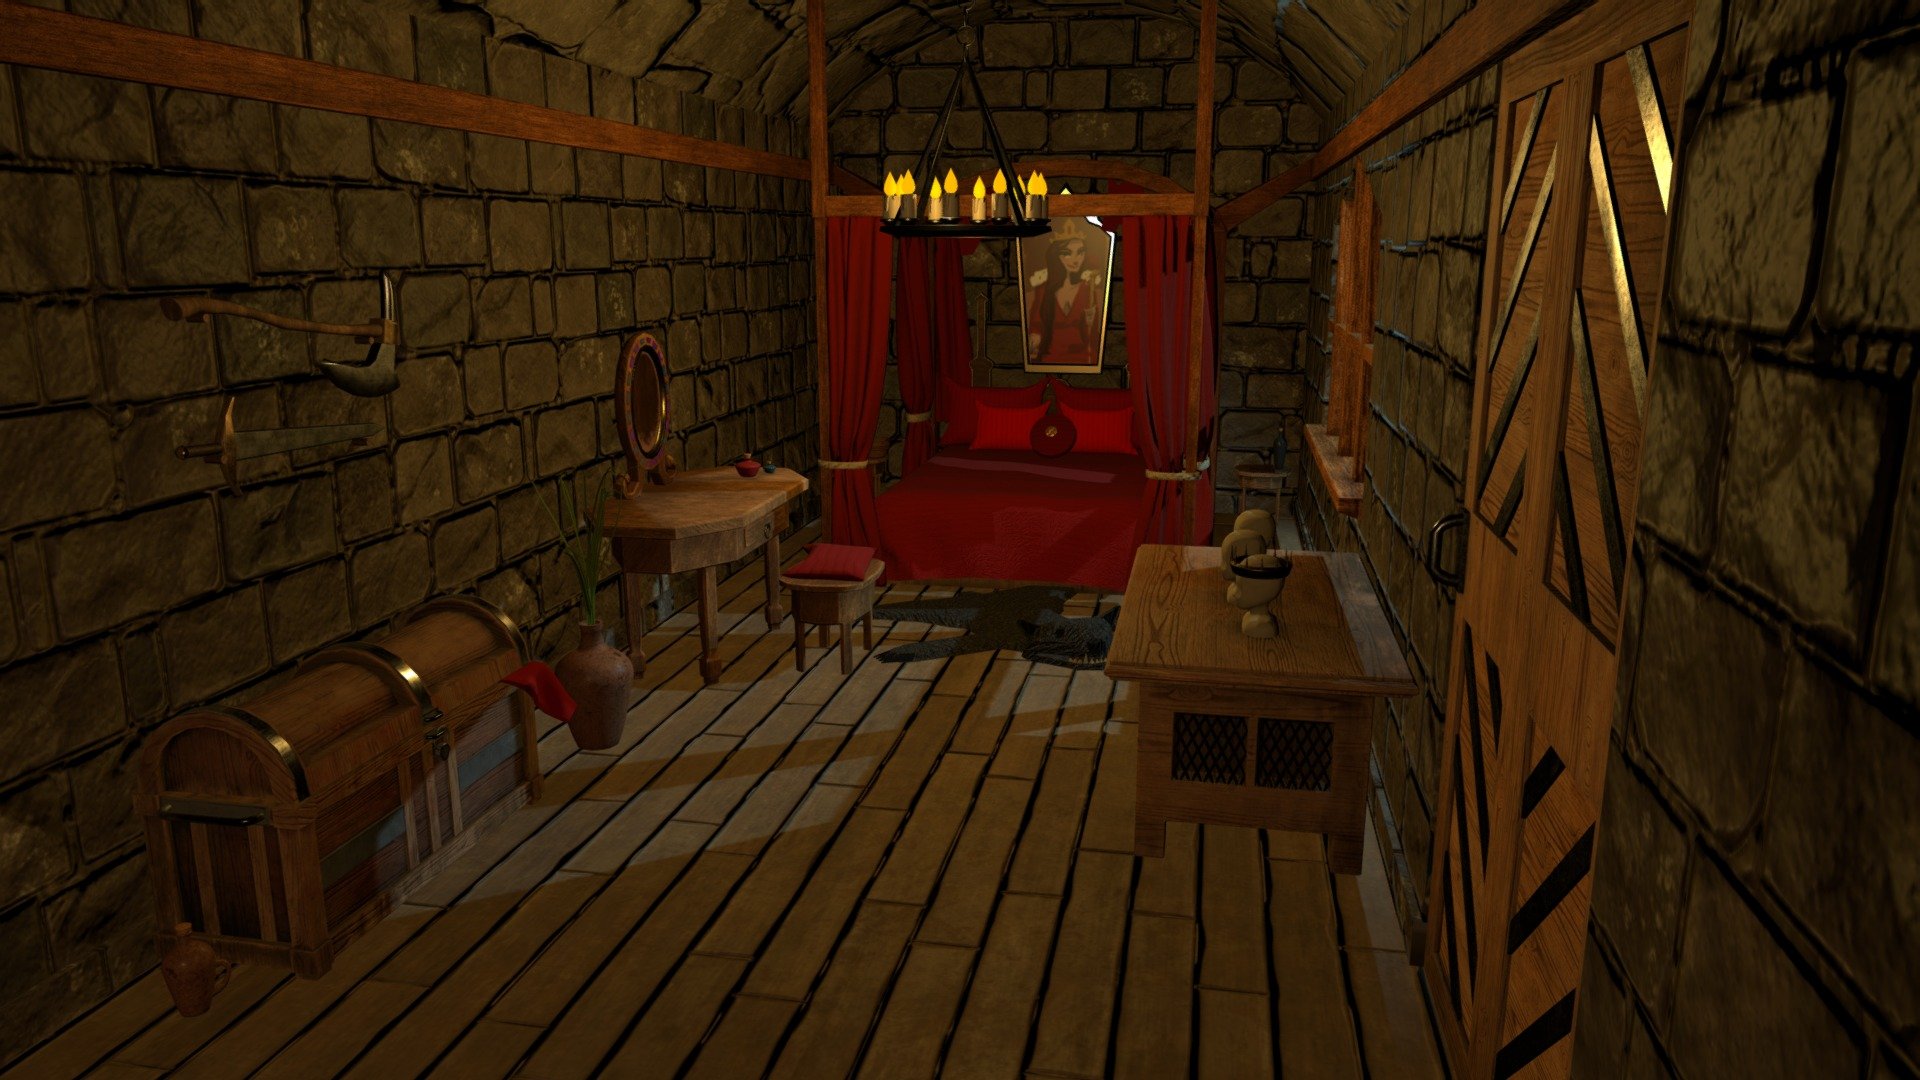 Modeling, layout, and Texturing of a late medieval queen's room.
From inspiration my wife drew, I wanted to take a sketch she did and build it in 3d. 

I've always been drawn to environment and prop modeling and sculpting, so this was a great learning process. I cycled through modeling about 5 or 6 different tables before I finally settled on the ones seen here.
Models Layout and Textures done by me. 
Hope you like it.
As always feedback is more than welcome.

WHen you buy you get everything seen here, Treasure Chest, Canopy Bed, Pillow, Drapes, Blankets, Potted Plants, Makeup Table, Stool, Sword, Axe, Chandelier, Bottles, Mannequin Heads, and more.

https://www.artstation.com/artwork/Z5nvDR - Medieval Props Room - Buy Royalty Free 3D model by Addison Moyer (@Addison.Moyer) 3d model